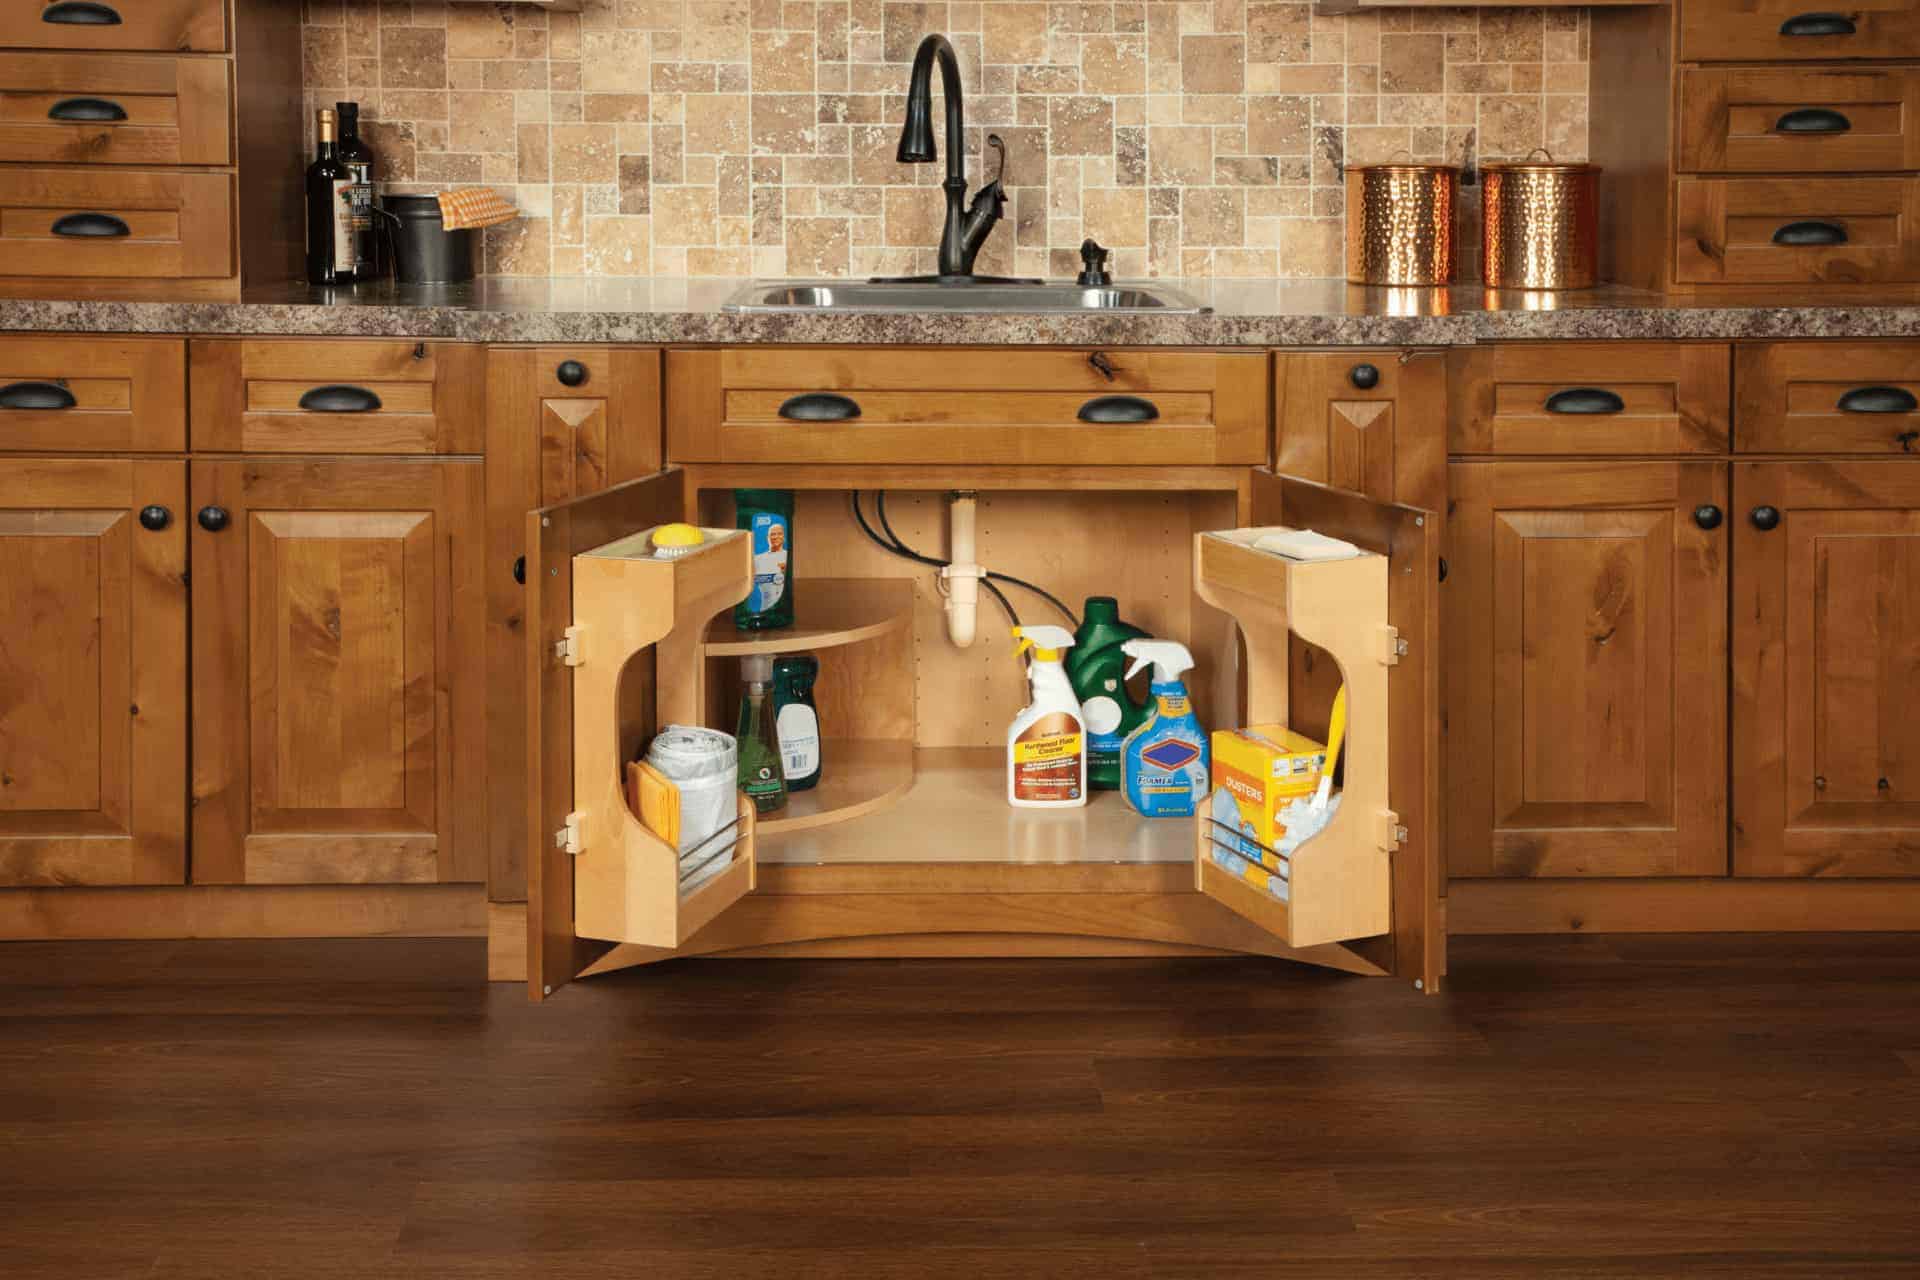 An under-sink cabinetry holding some cleaning items.